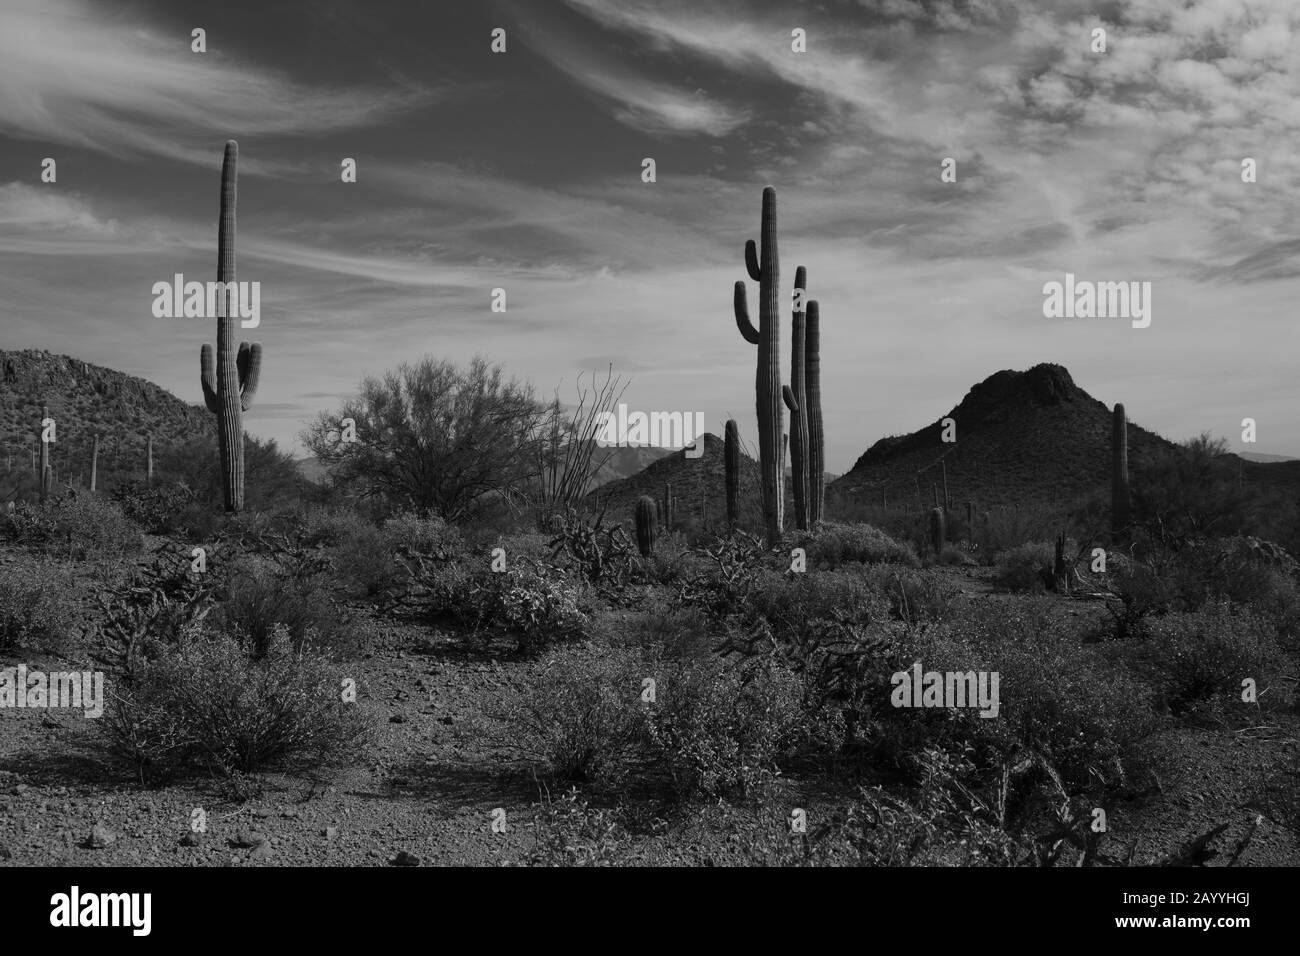 Iconic Saguaro National Park On A Cloudy Day In Black And White Stock Photo